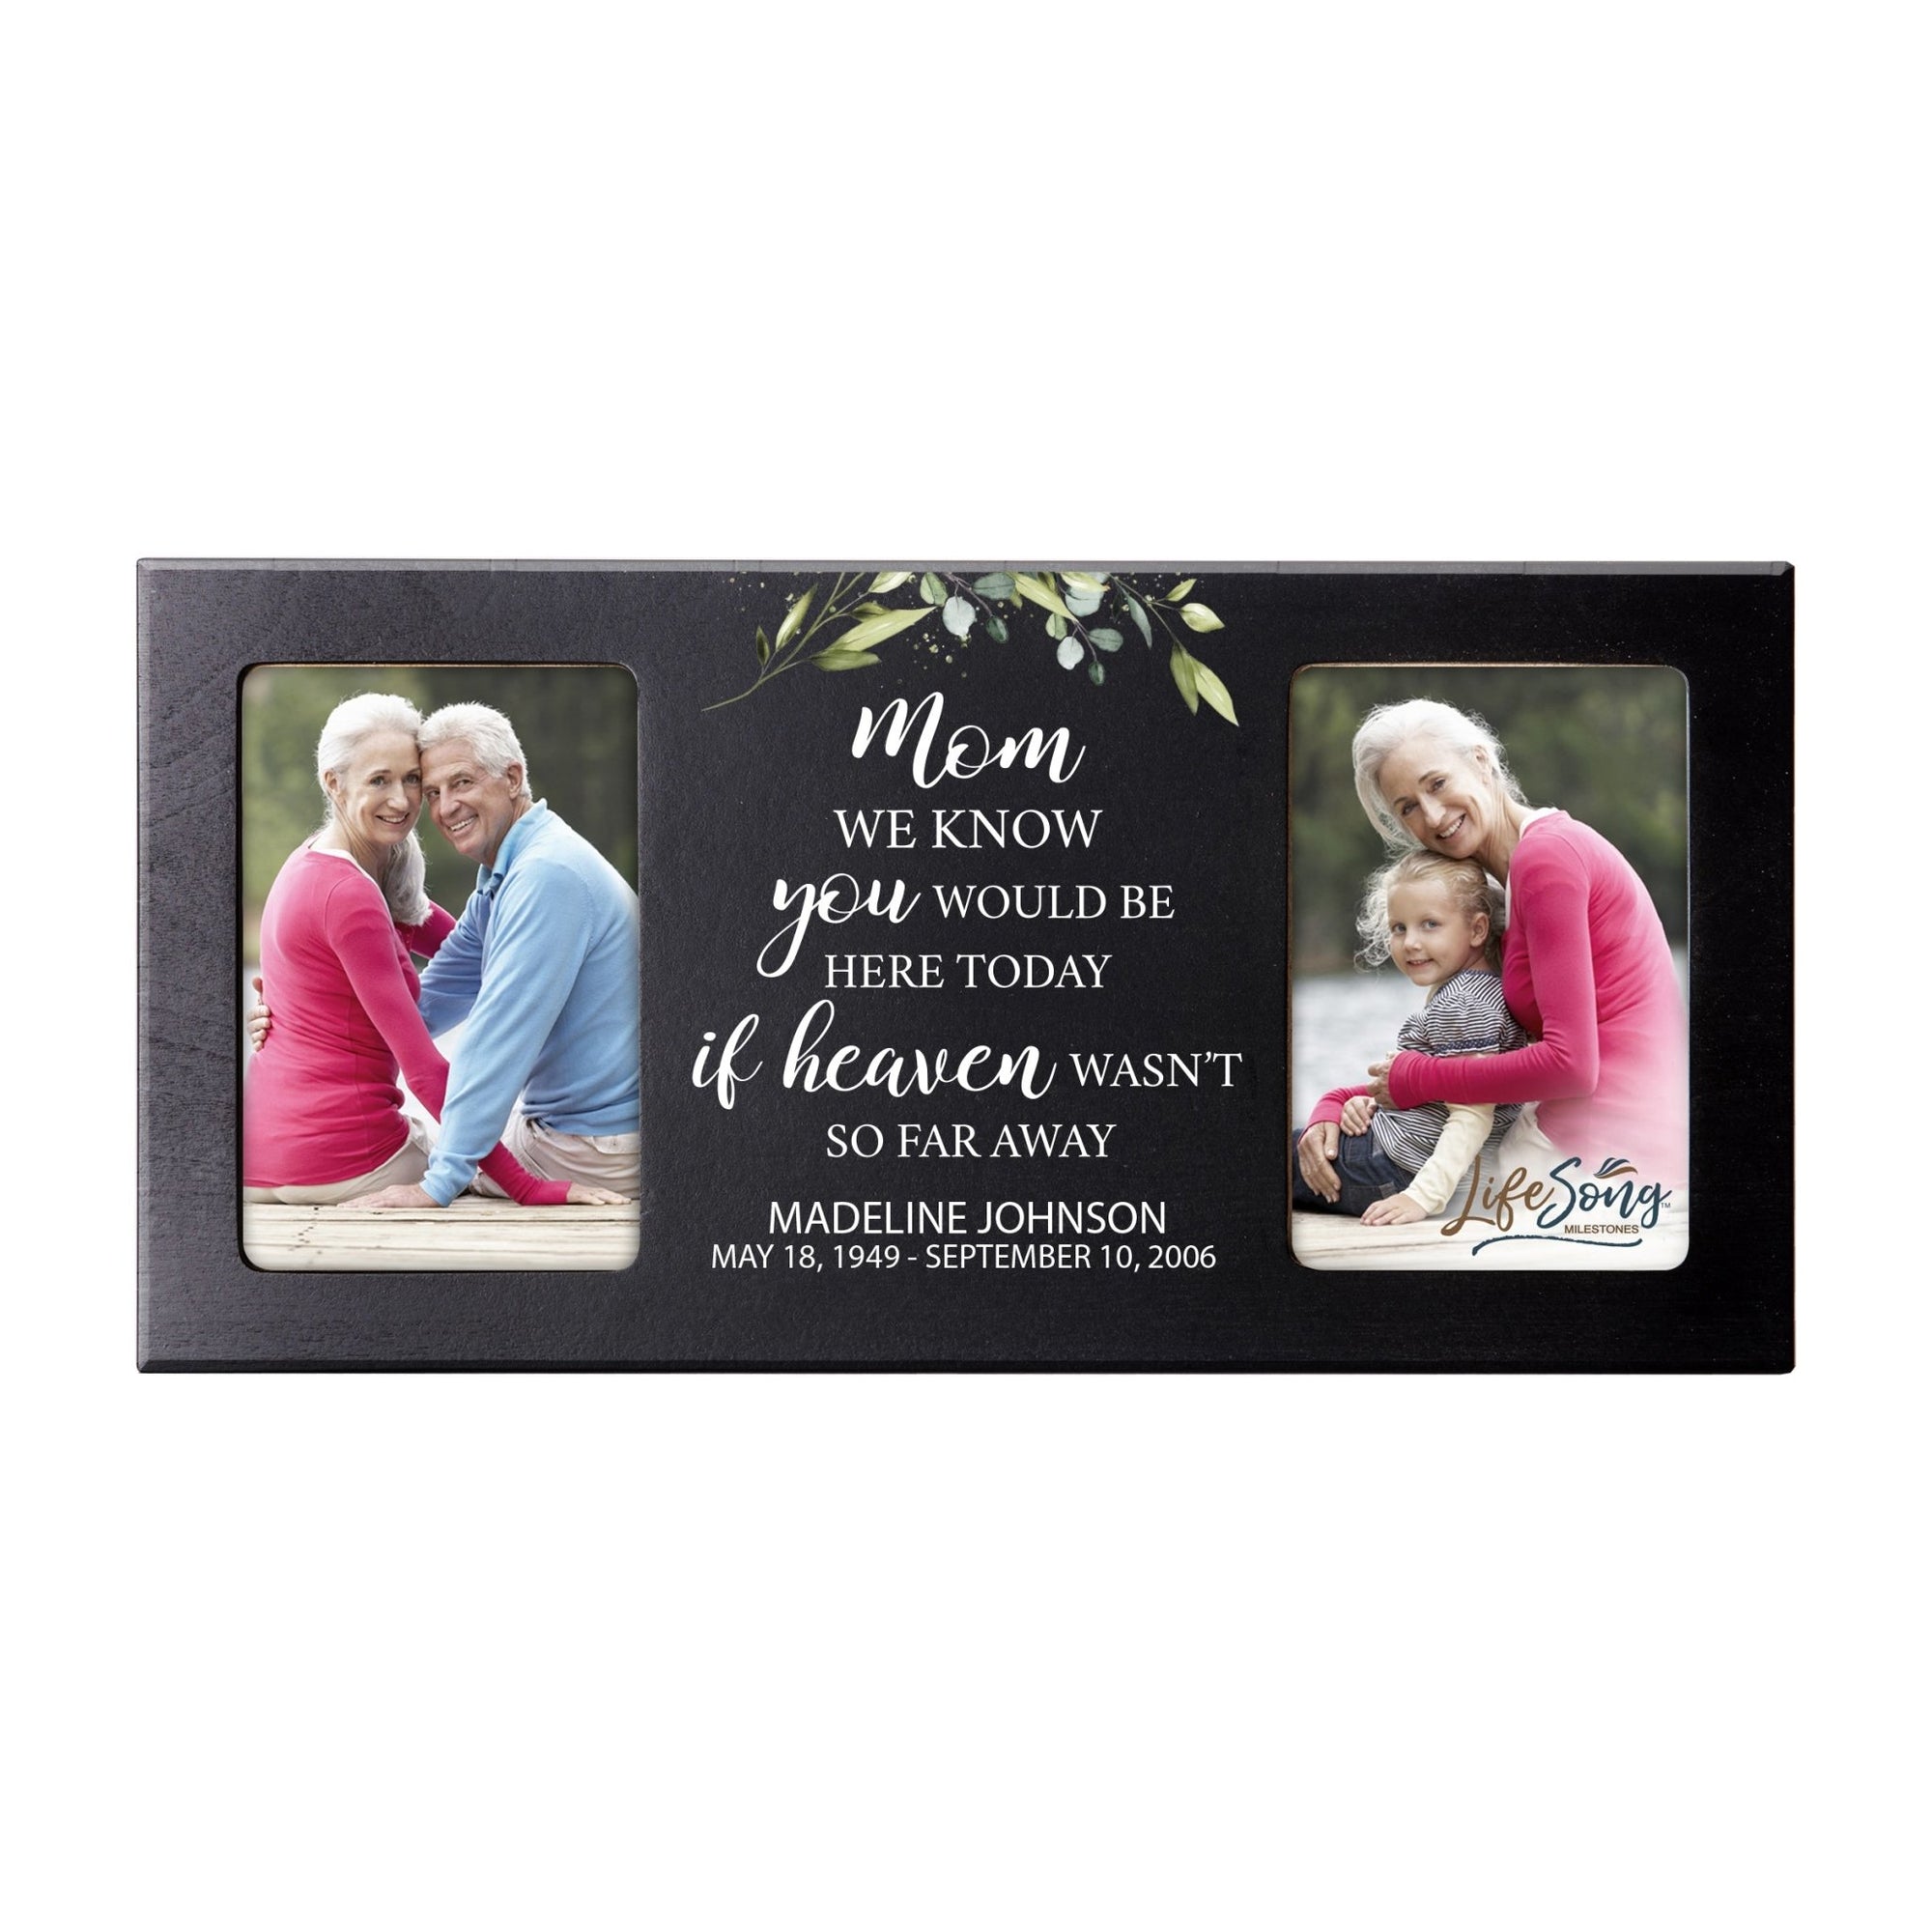 Custom Memorial Picture Frame 16x8in Holds Two 4x6in Photos - Mom, We Know You Would - LifeSong Milestones